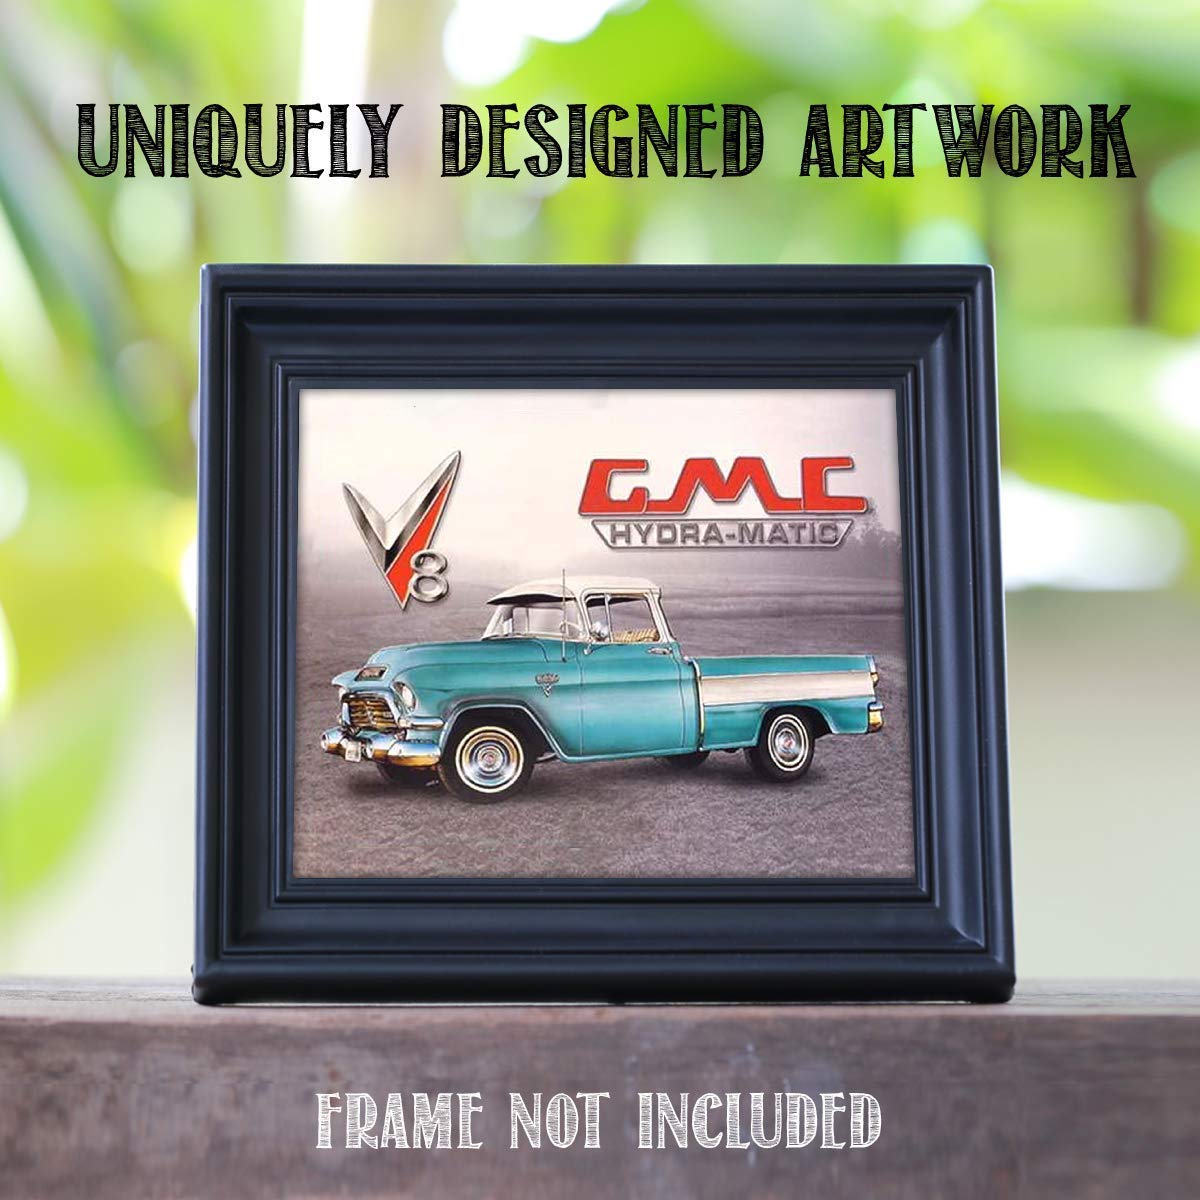 GMC Hydramatic Truck Sign Print- 8 x10" Wall Decor Image- Ready To Frame. Retro Sign Replica. Gifts for Men-Home Decor-Office Decor. Perfect for Man Cave-Game Room-Garage.